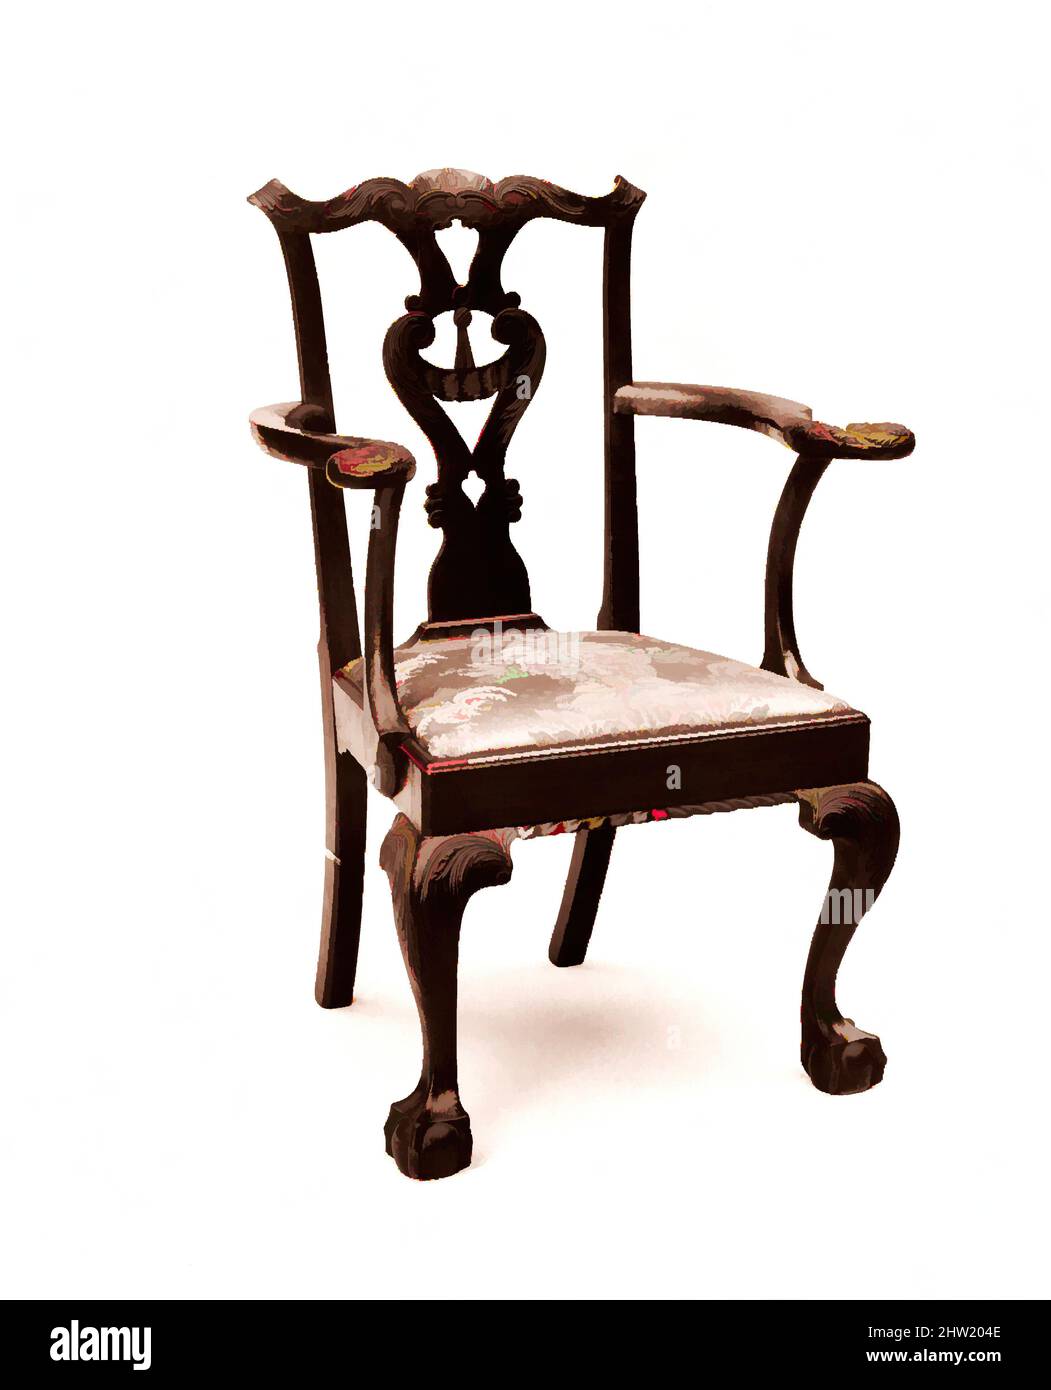 Art inspired by Armchair, 1755–75, Made in New York, United States, American, Mahogany, tulip poplar, sweet gum, white pine, 39 1/8 x 20 7/8 x 22 in. (99.4 x 53 x 55.9 cm), Furniture, Classic works modernized by Artotop with a splash of modernity. Shapes, color and value, eye-catching visual impact on art. Emotions through freedom of artworks in a contemporary way. A timeless message pursuing a wildly creative new direction. Artists turning to the digital medium and creating the Artotop NFT Stock Photo